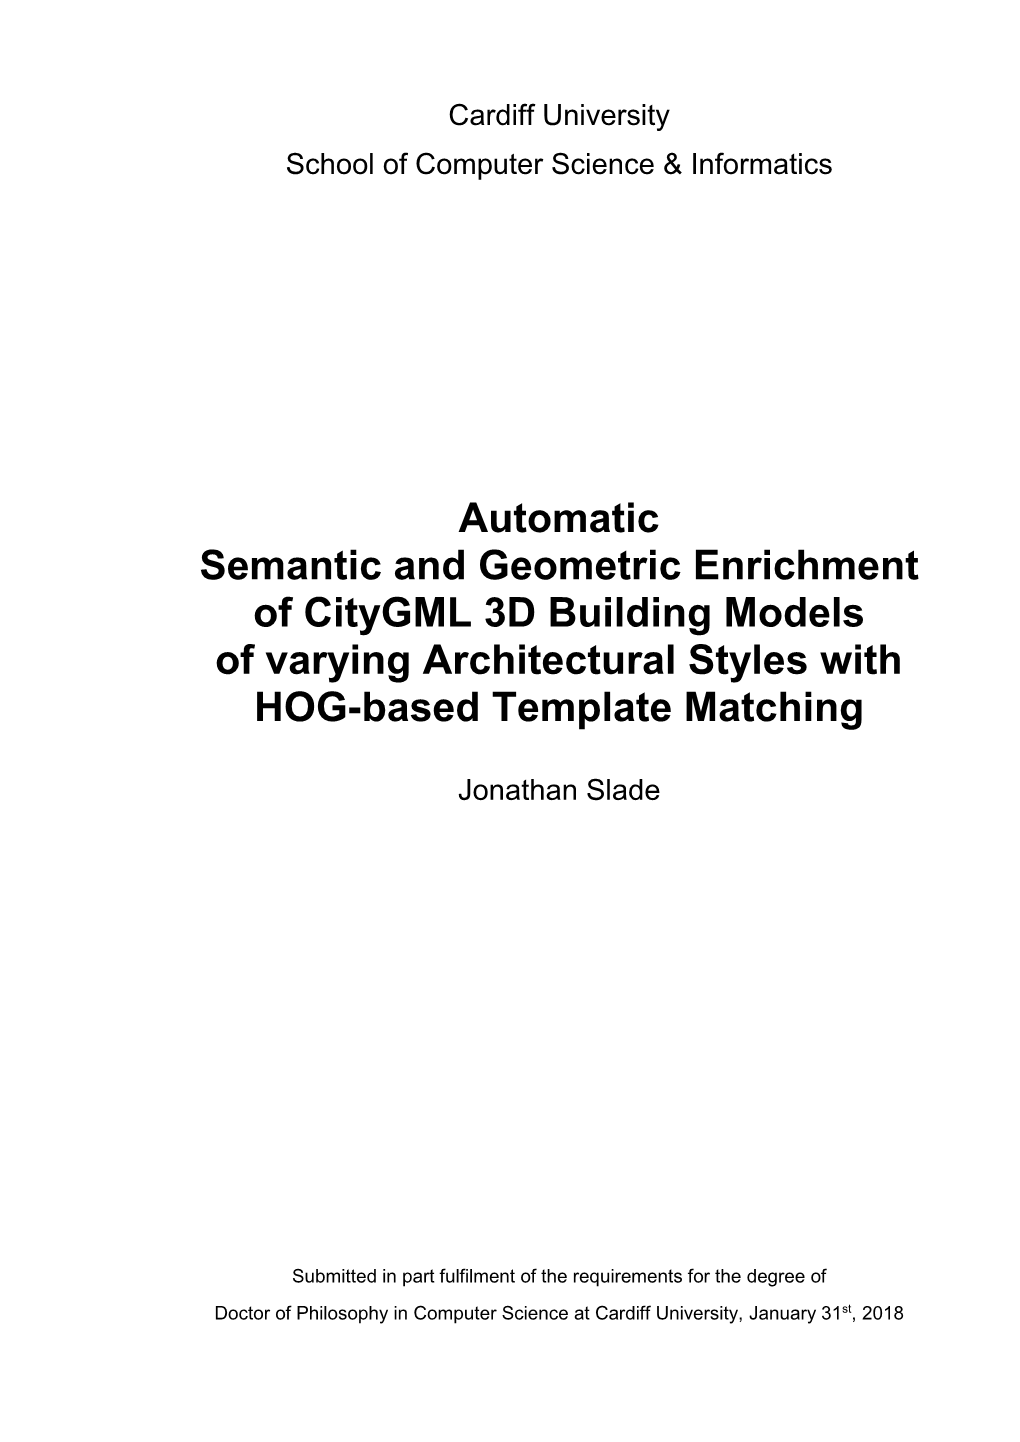 Automatic Semantic and Geometric Enrichment of Citygml 3D Building Models of Varying Architectural Styles with HOG-Based Template Matching